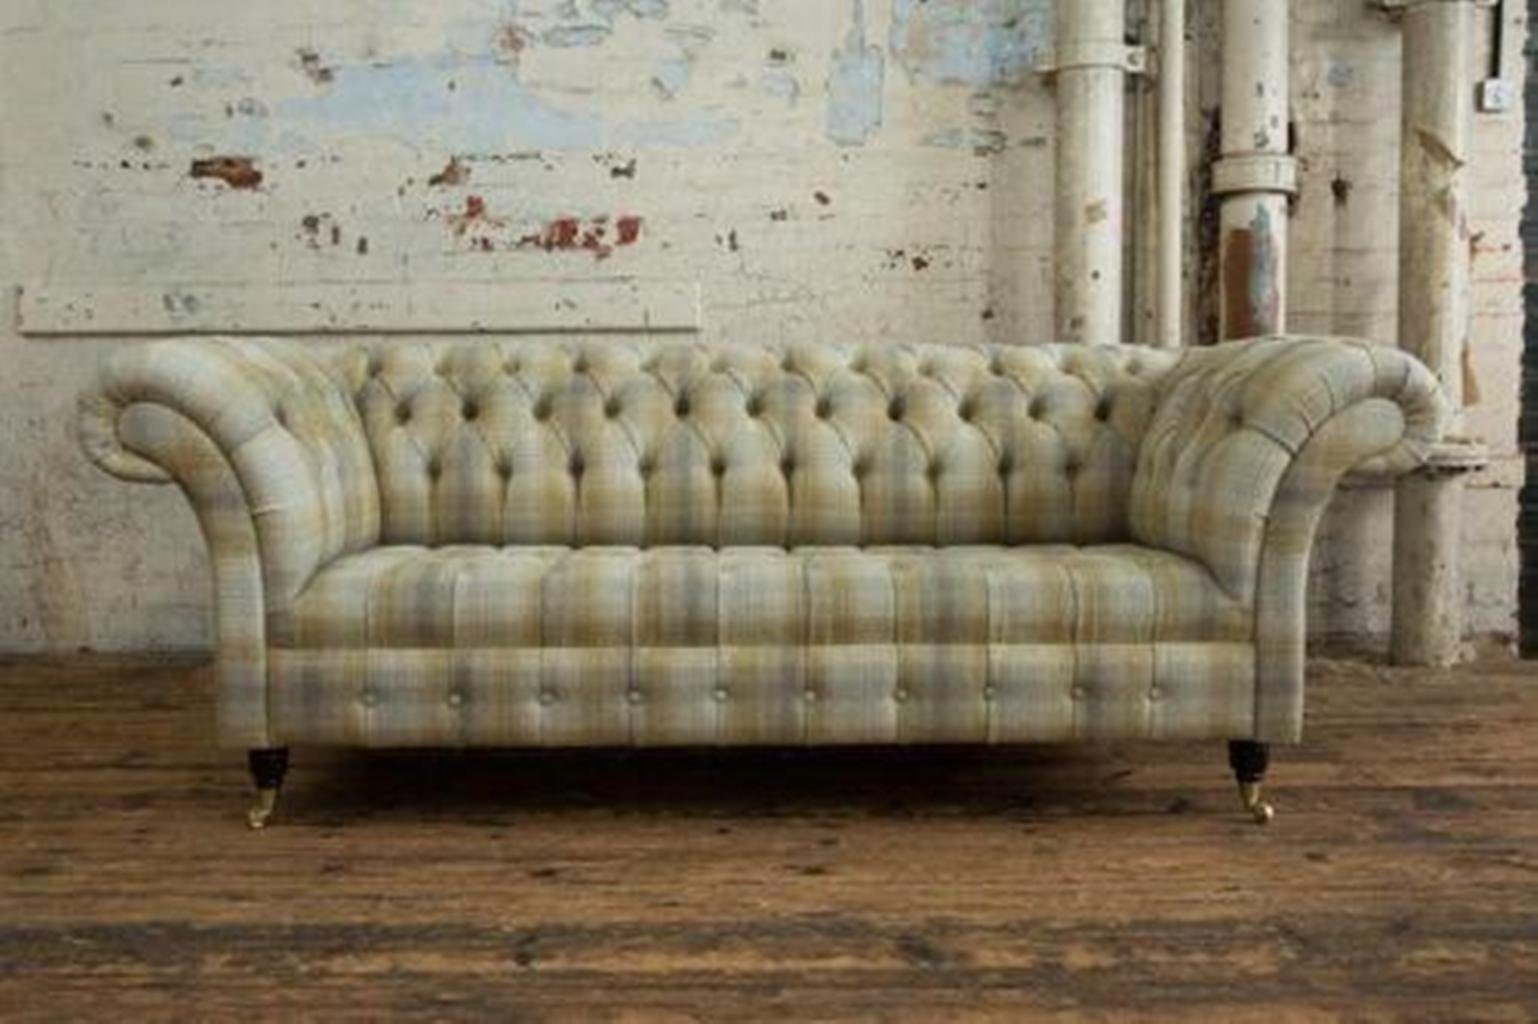 Chesterfield JVmoebel Couch Sofa Chesterfield-Sofa, Couchen Polster Textil Sofas